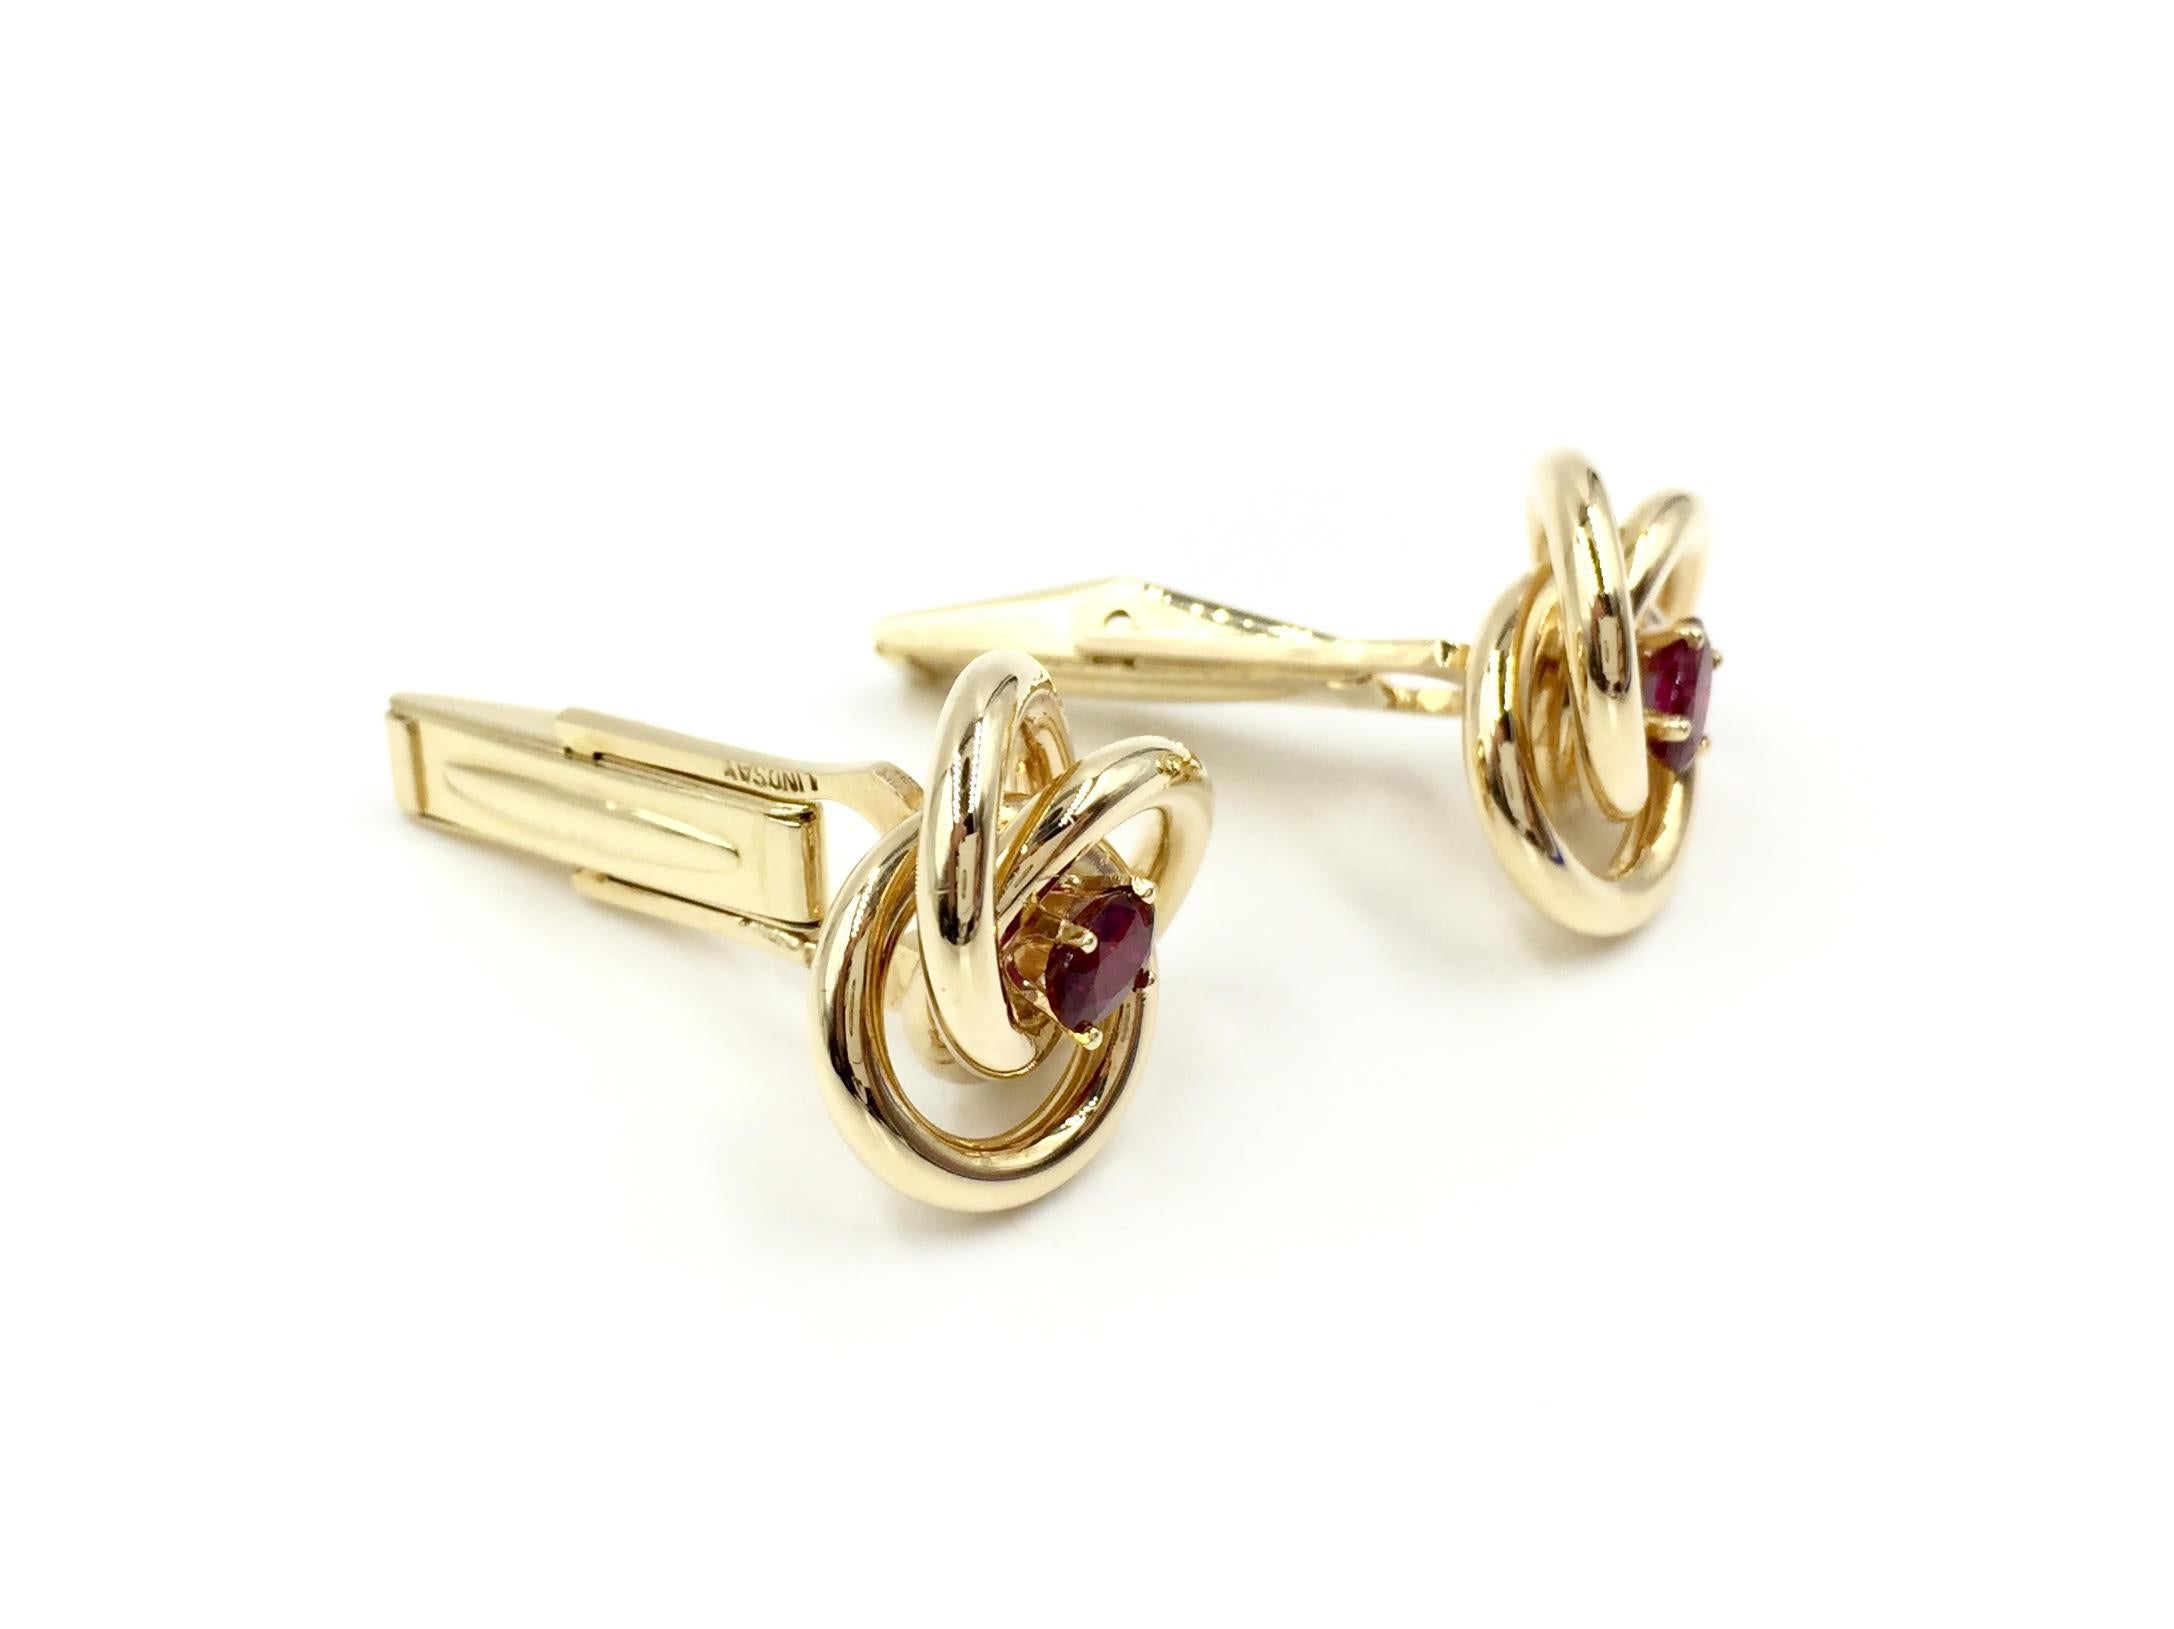 Timeless and stylish, these polished open knot cuff links feature oval rubies in the center. Made by Lindsay Co.
Ruby measures 5.5mm x 3mm, approximately .32 carats each. Knot measures 17mm across.
Each cuff link weighs 8.5 grams